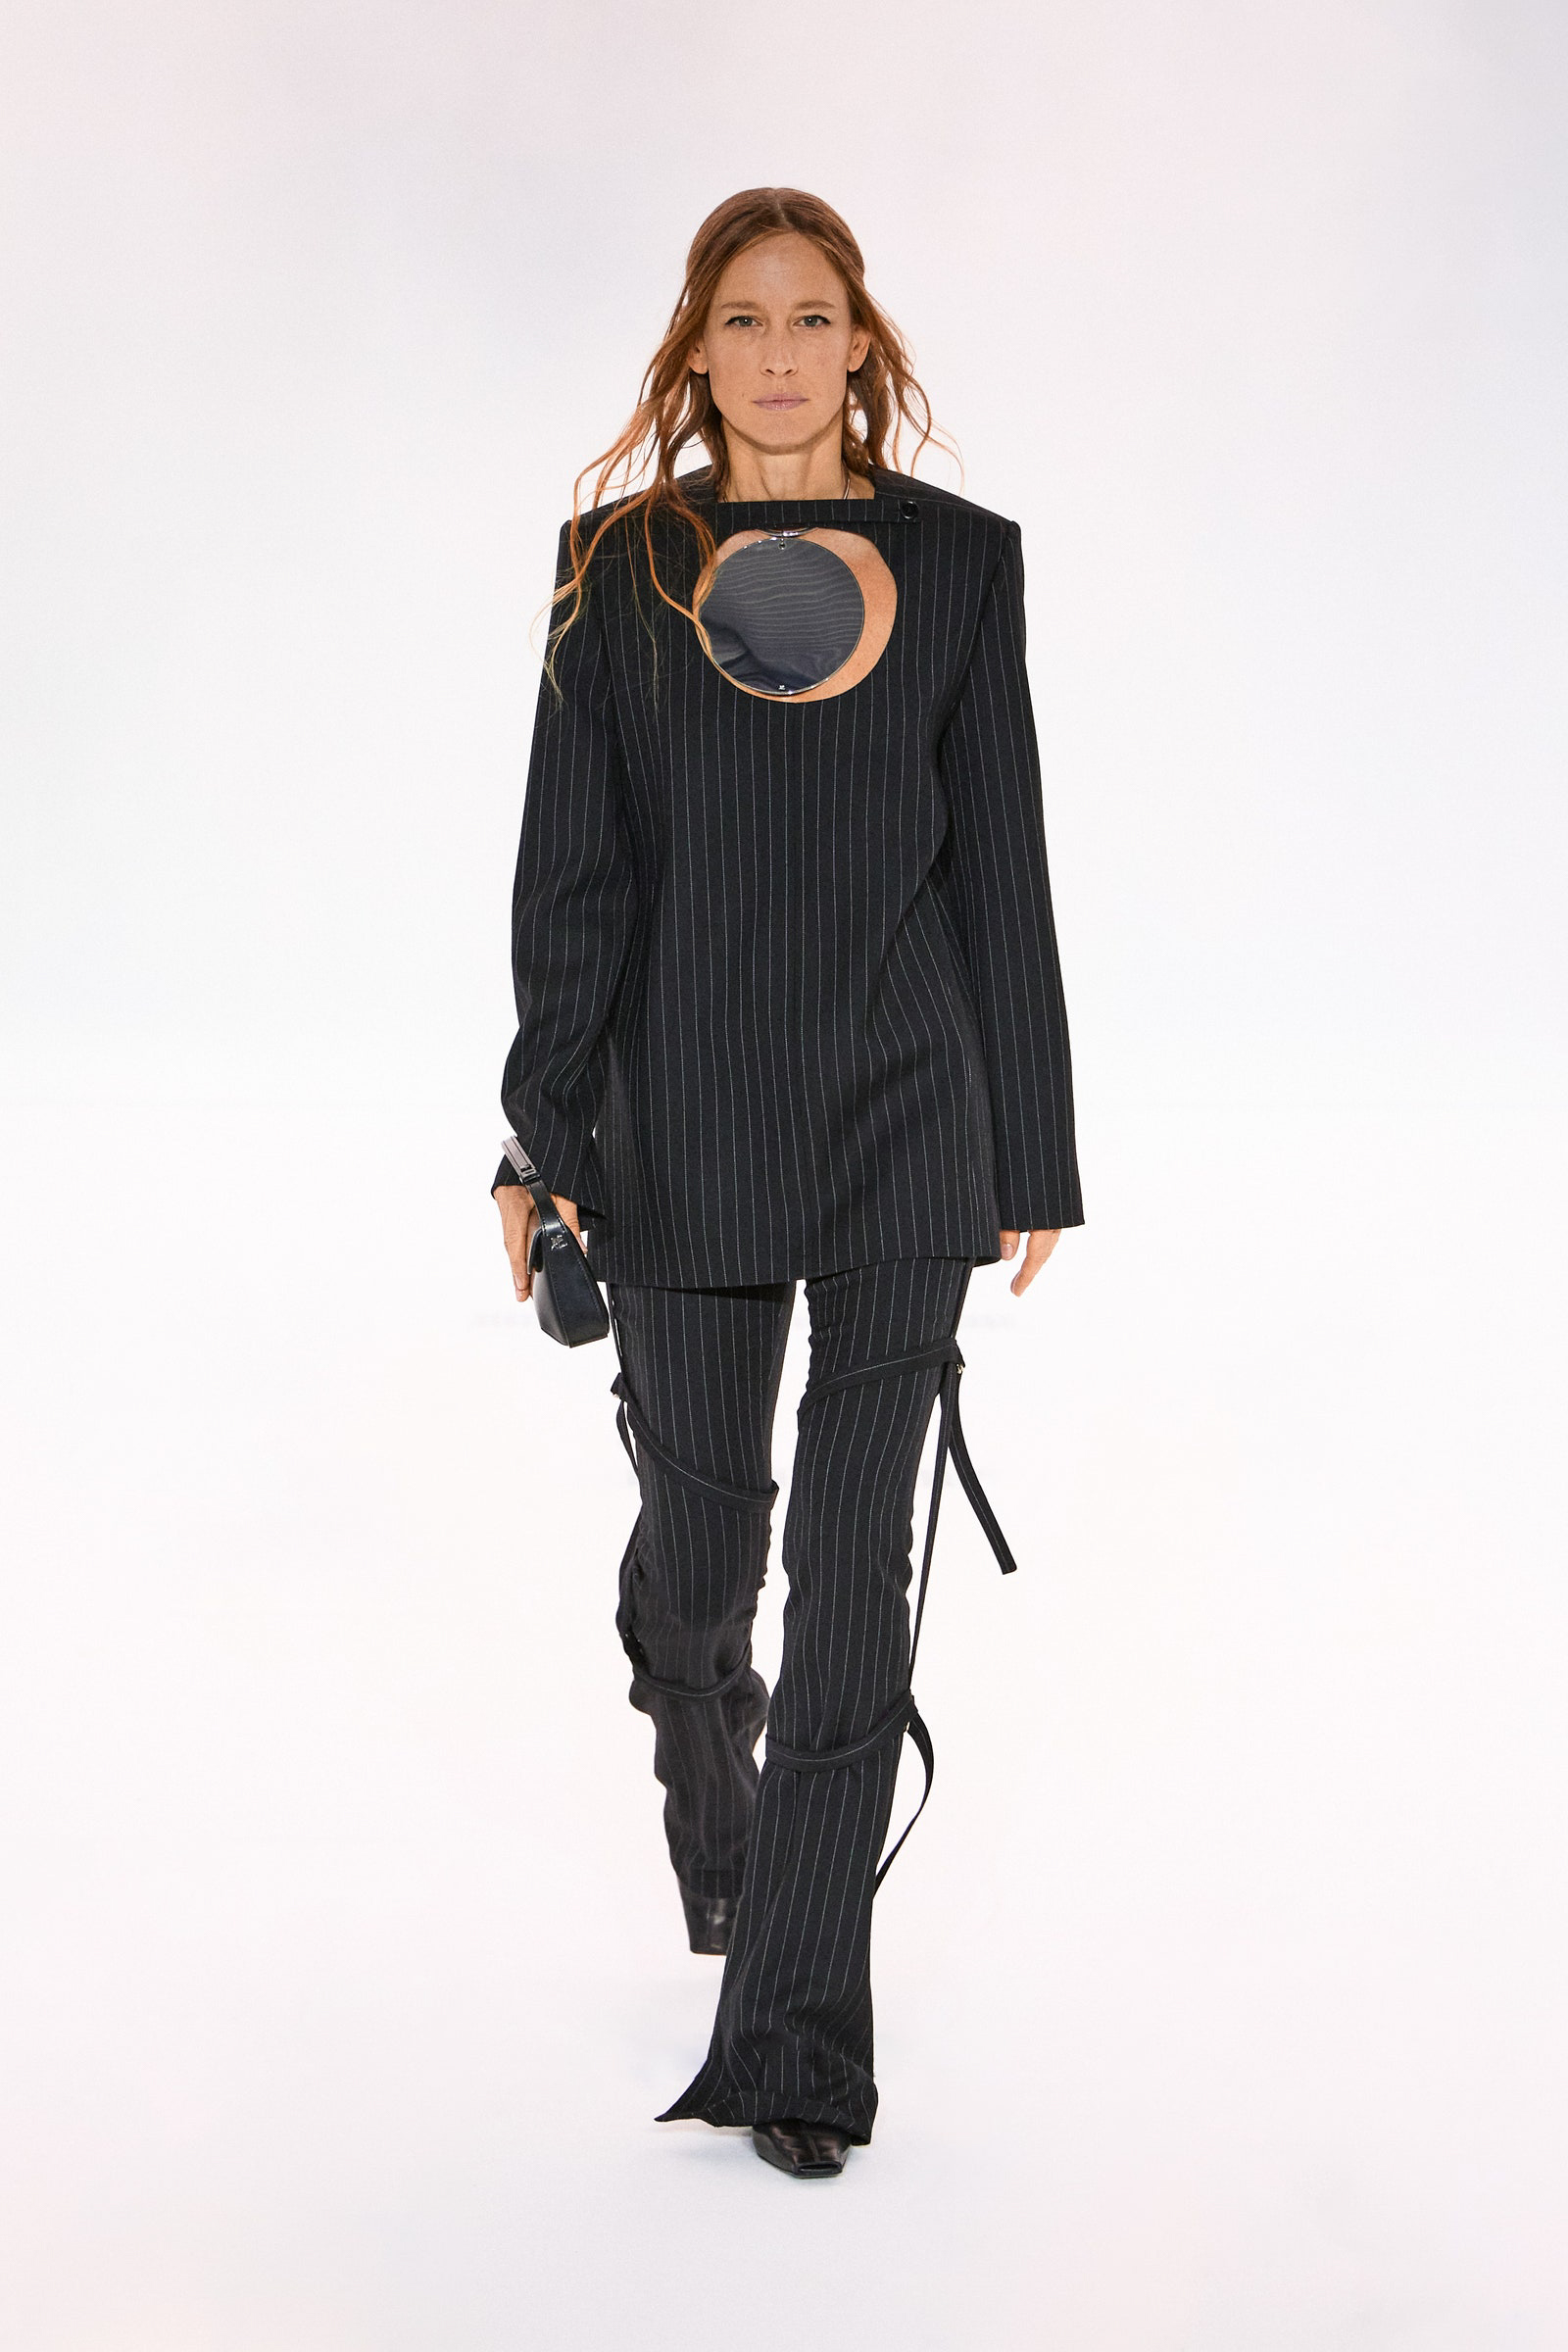 Natasa Vojnovic, 43, walked Nicolas Di Felice’s fall 2023 show for Courrèges and is also a favorite of Casey Cadwallader at Mugler.